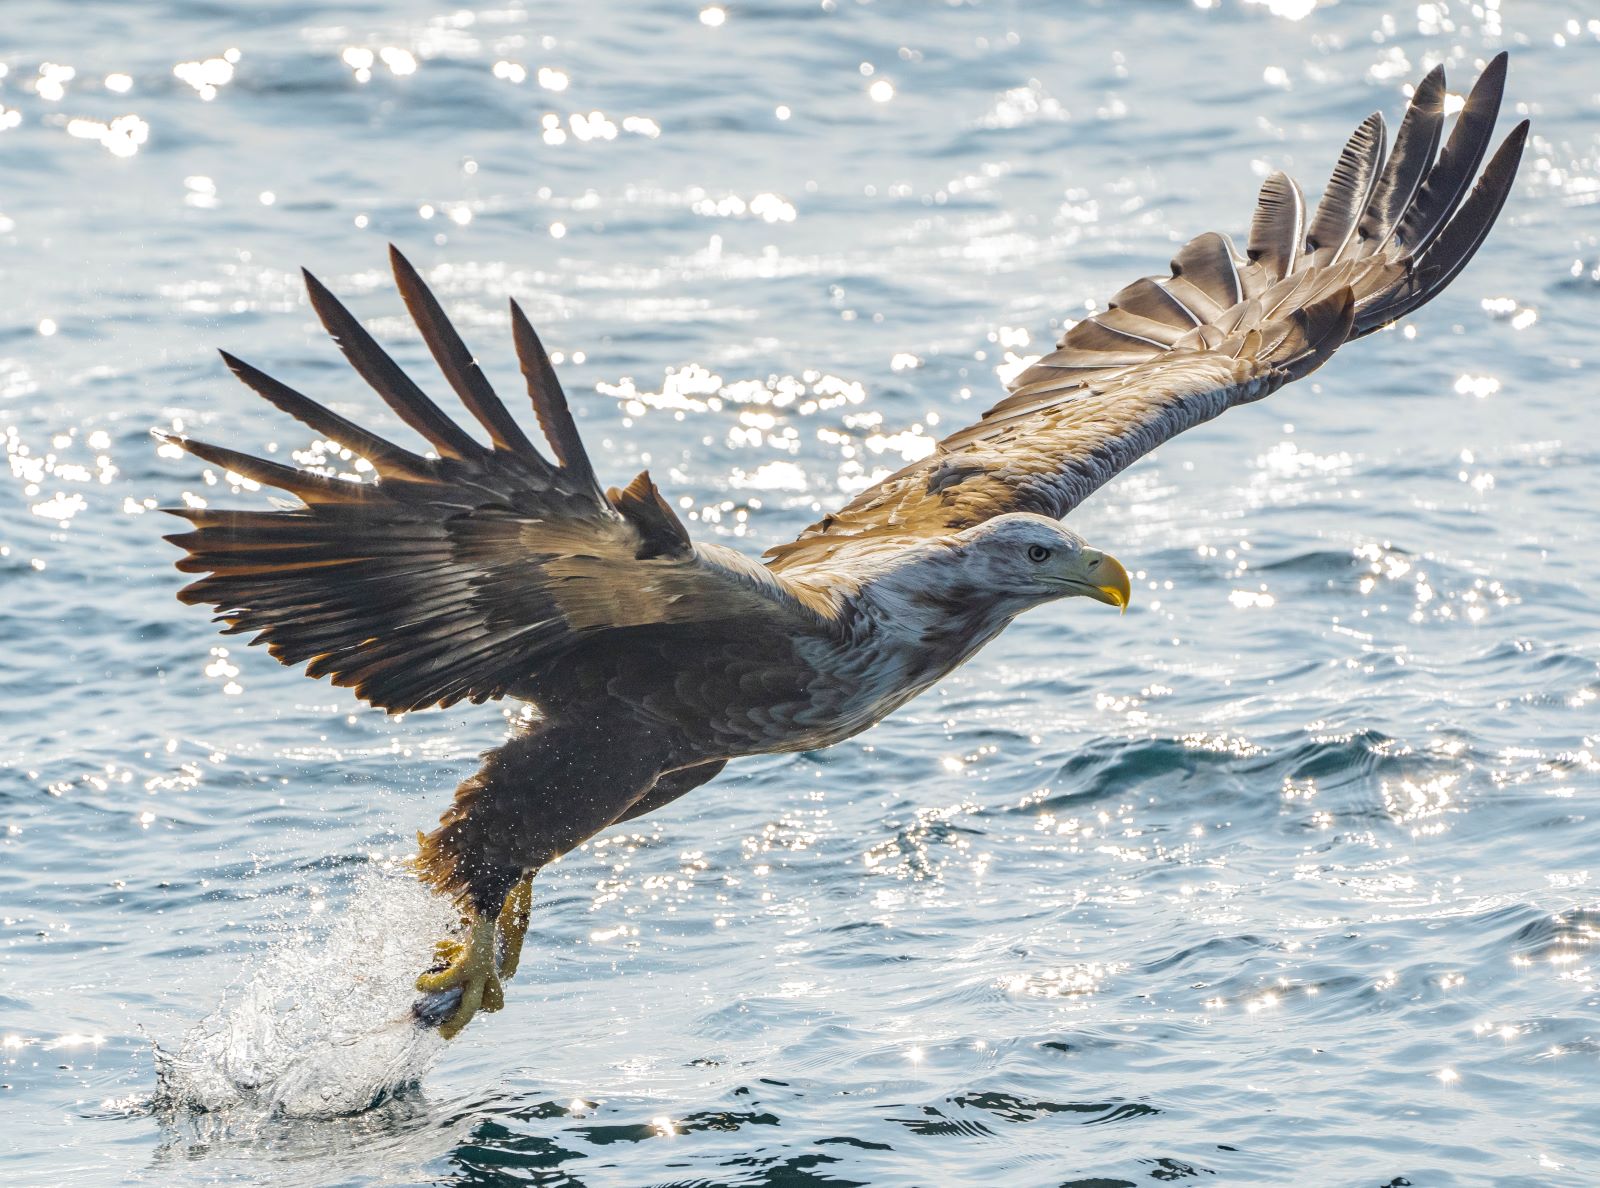 A sea eagle spotted hunting in the Lofoten Islands (Credit: Ismaele Tortella - VisitNorway)